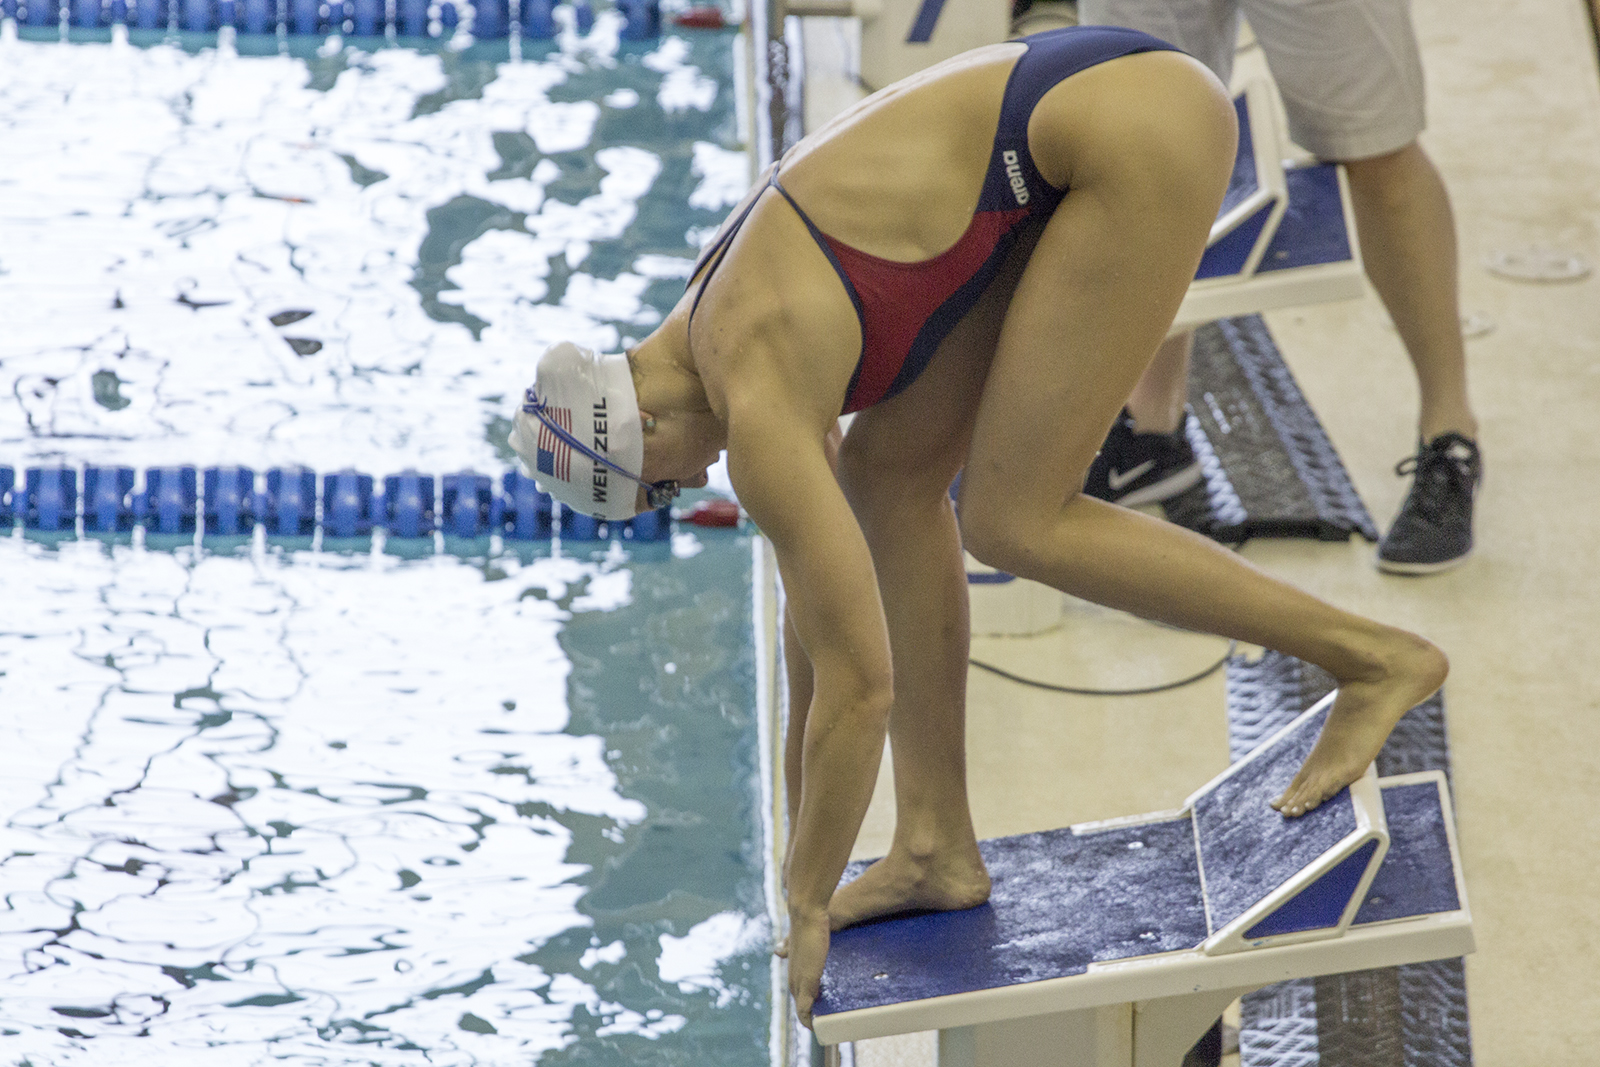 Abbey Weitzeil prepares to dive off a block at an open practice session at Georgia Tech's McAuley Aquatic Center on July 30, 2016